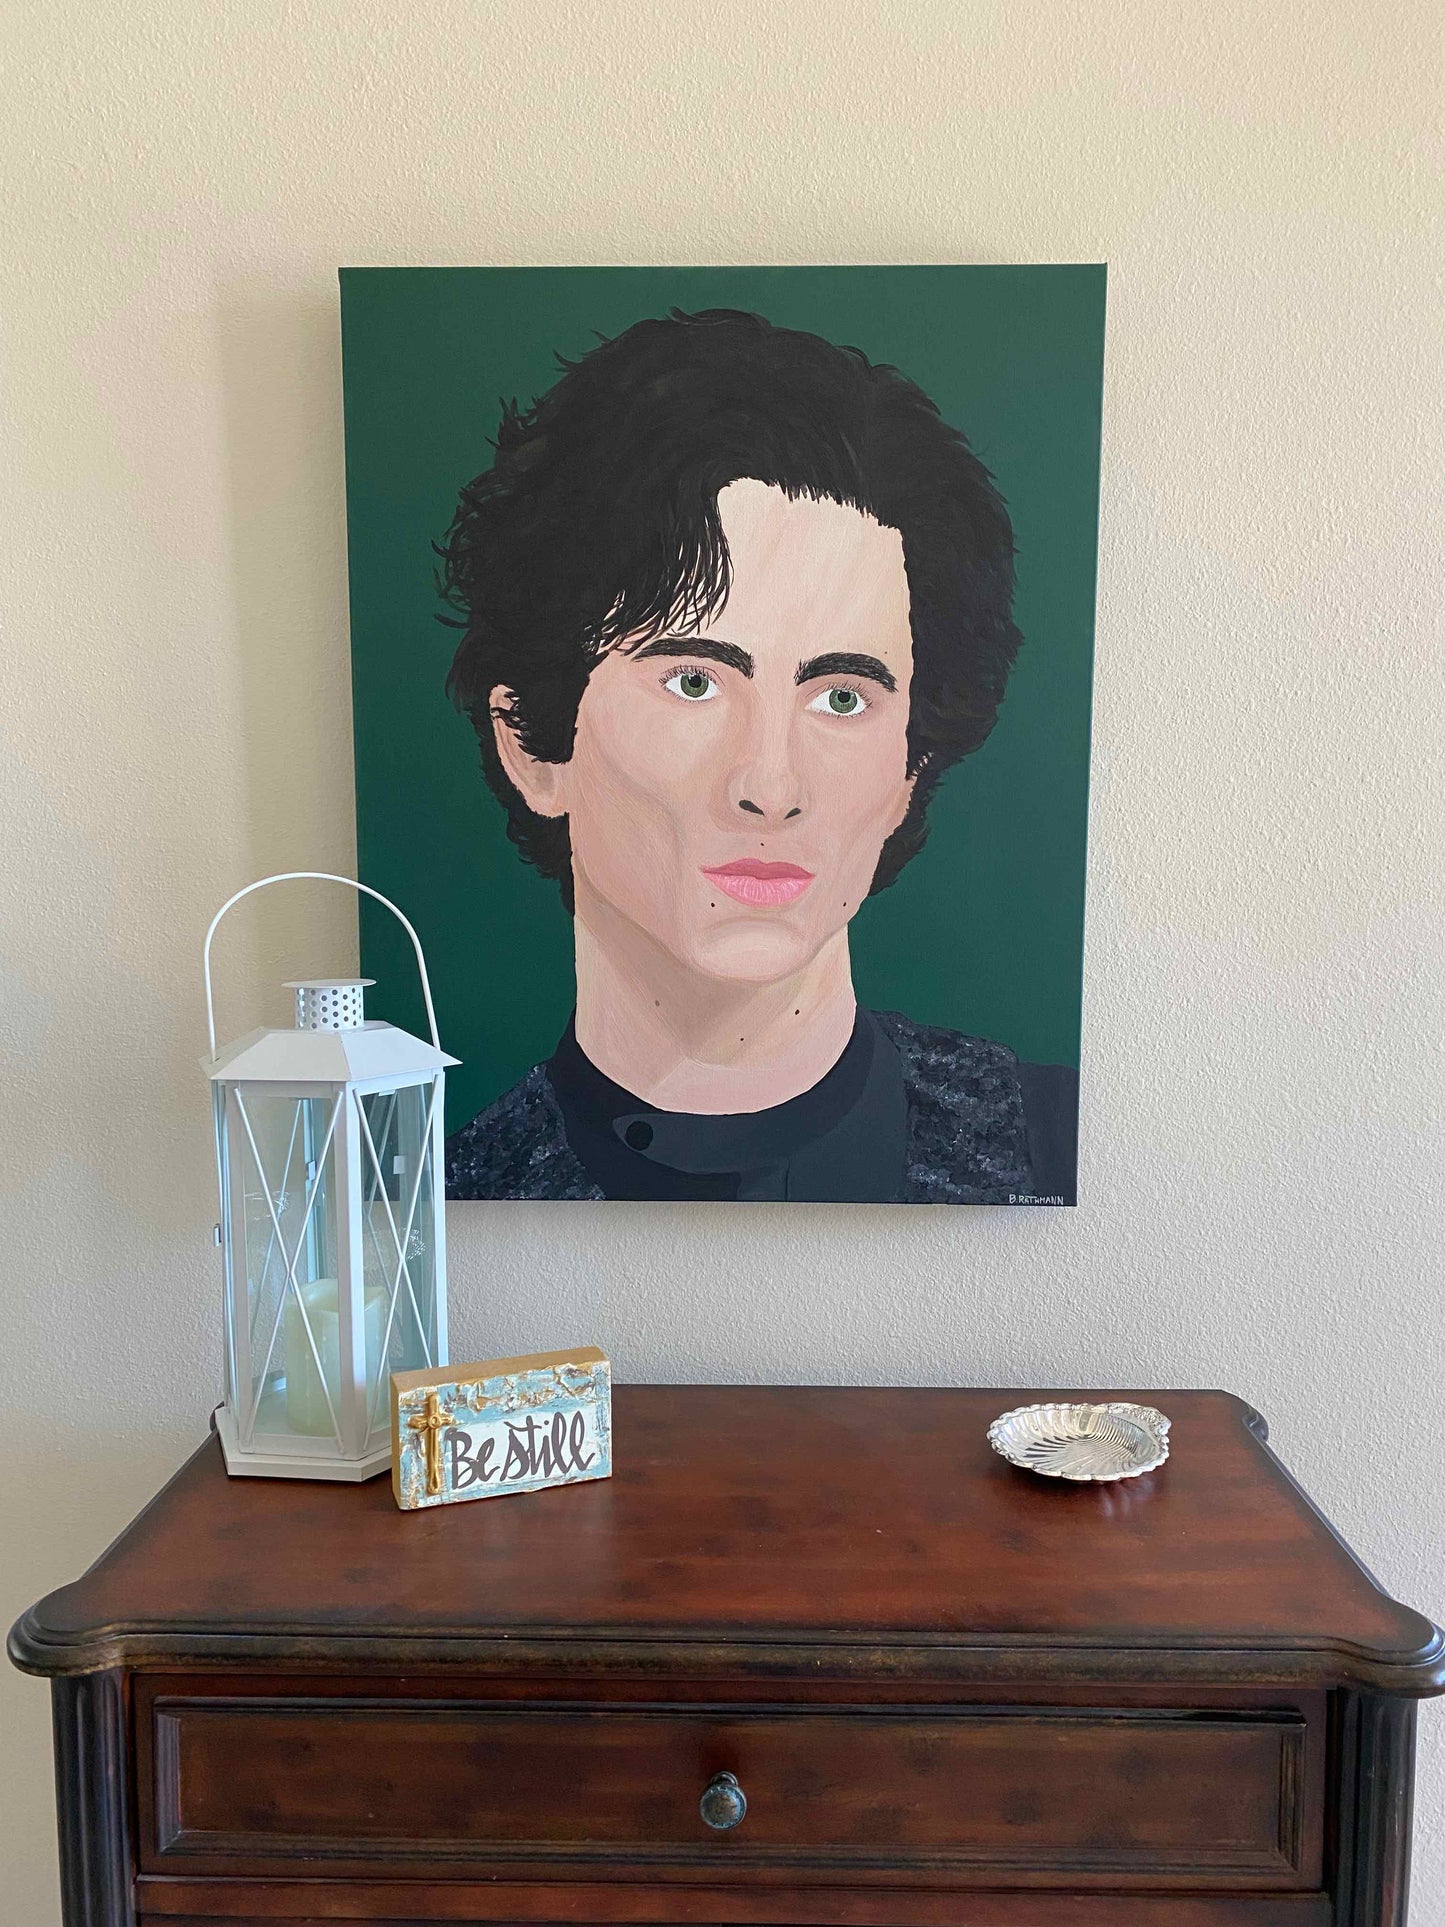 Timothée Chalamet Portrait Painting is a portrait of Timothée Chalamet. This is a portrait rendition of the Timothée Chalamet will add a fun and bold aesthetic with your decor. This piece was featured at the "Go Figure" exhibit at The Foster Gallery in Sandestin, Florida. Measurement: 24"x30"